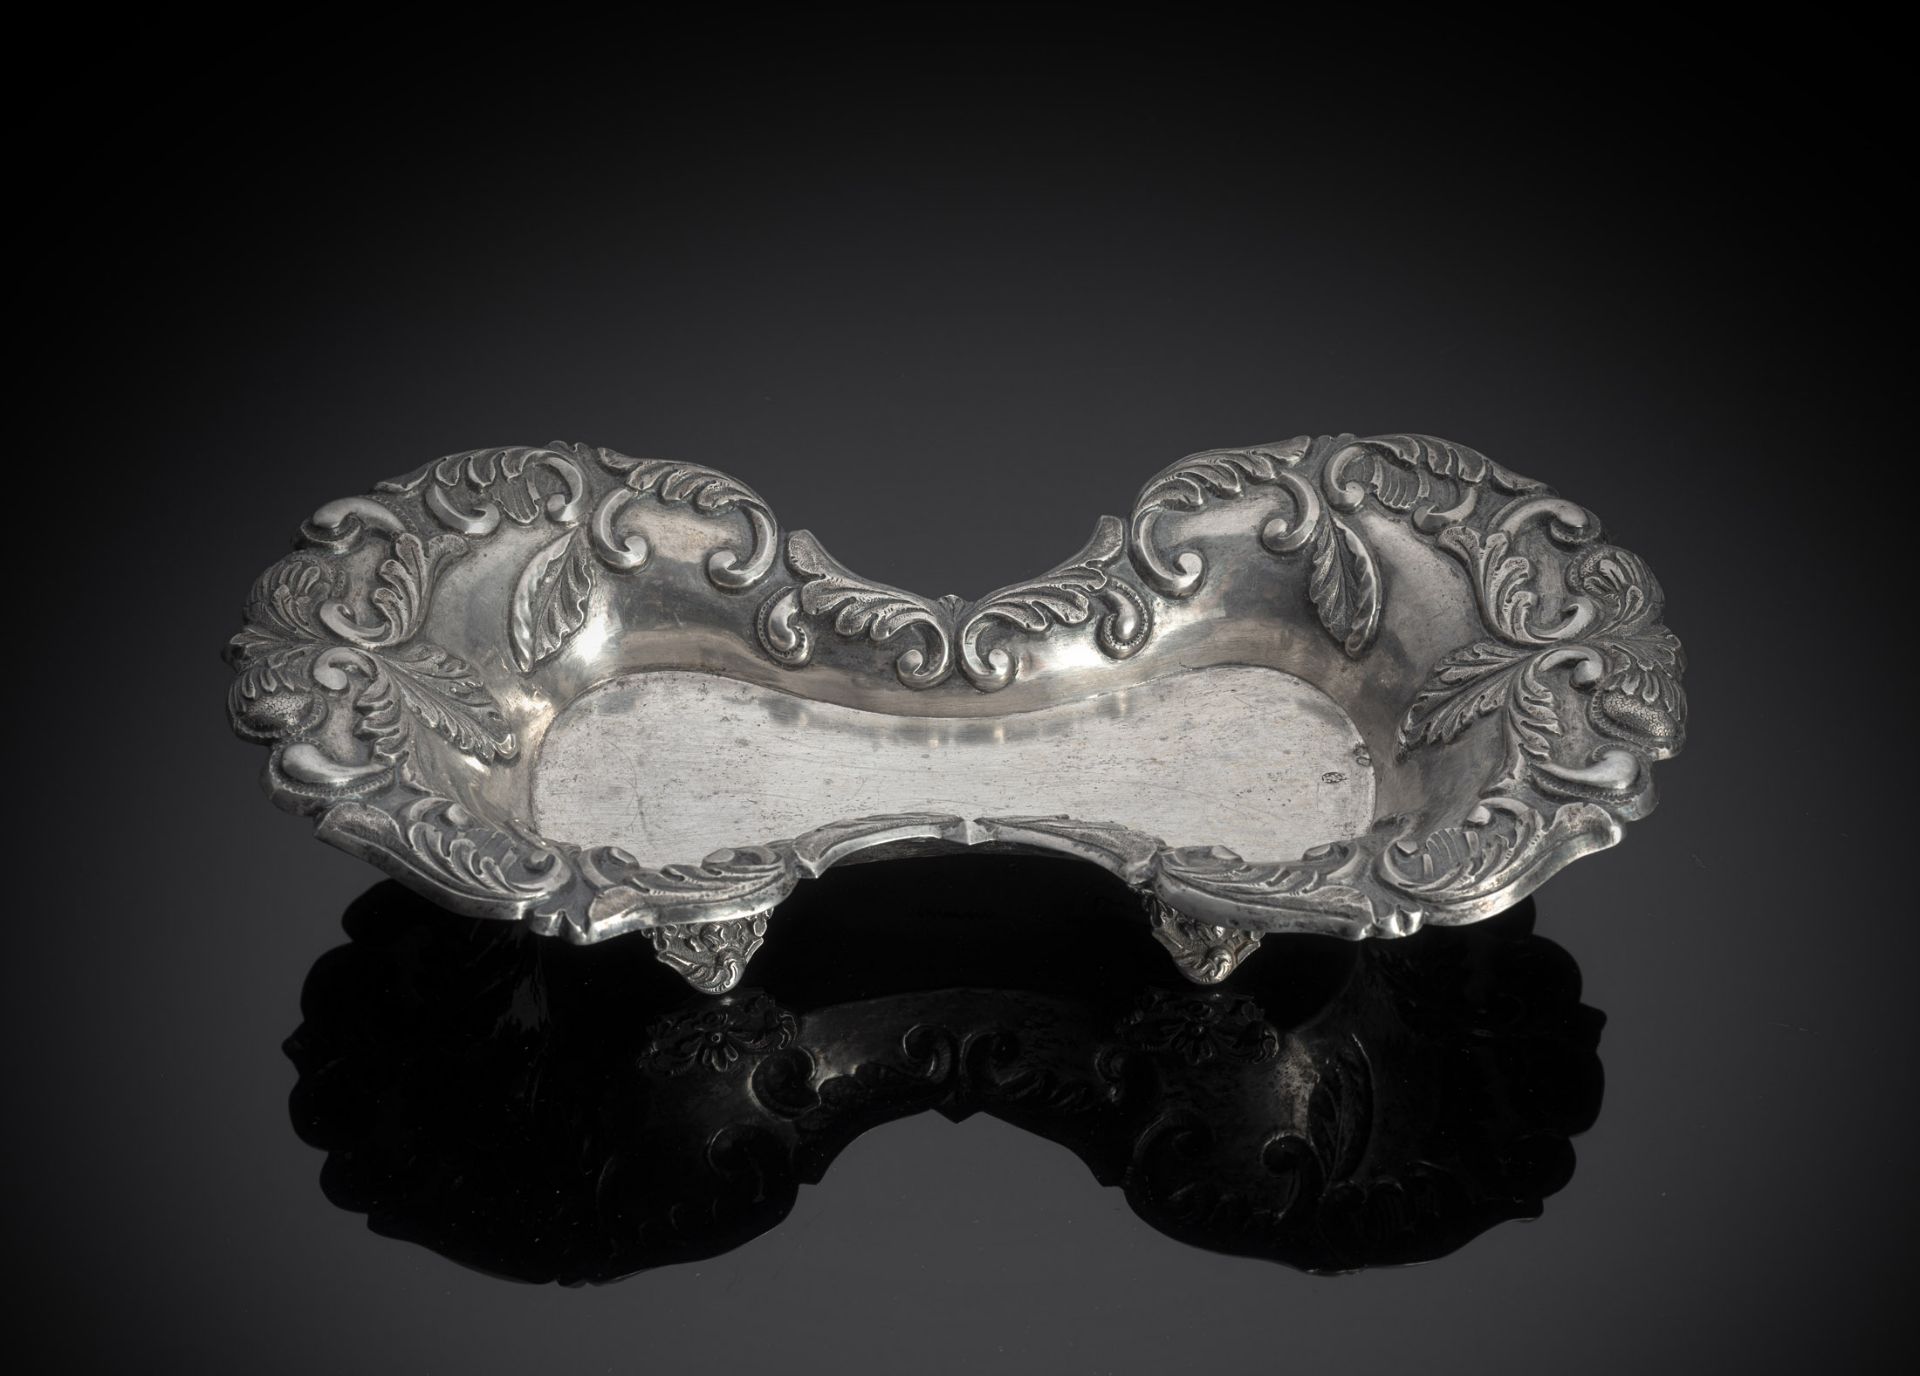 A ROCOCO STYLE SILVER FOOTED BOWL